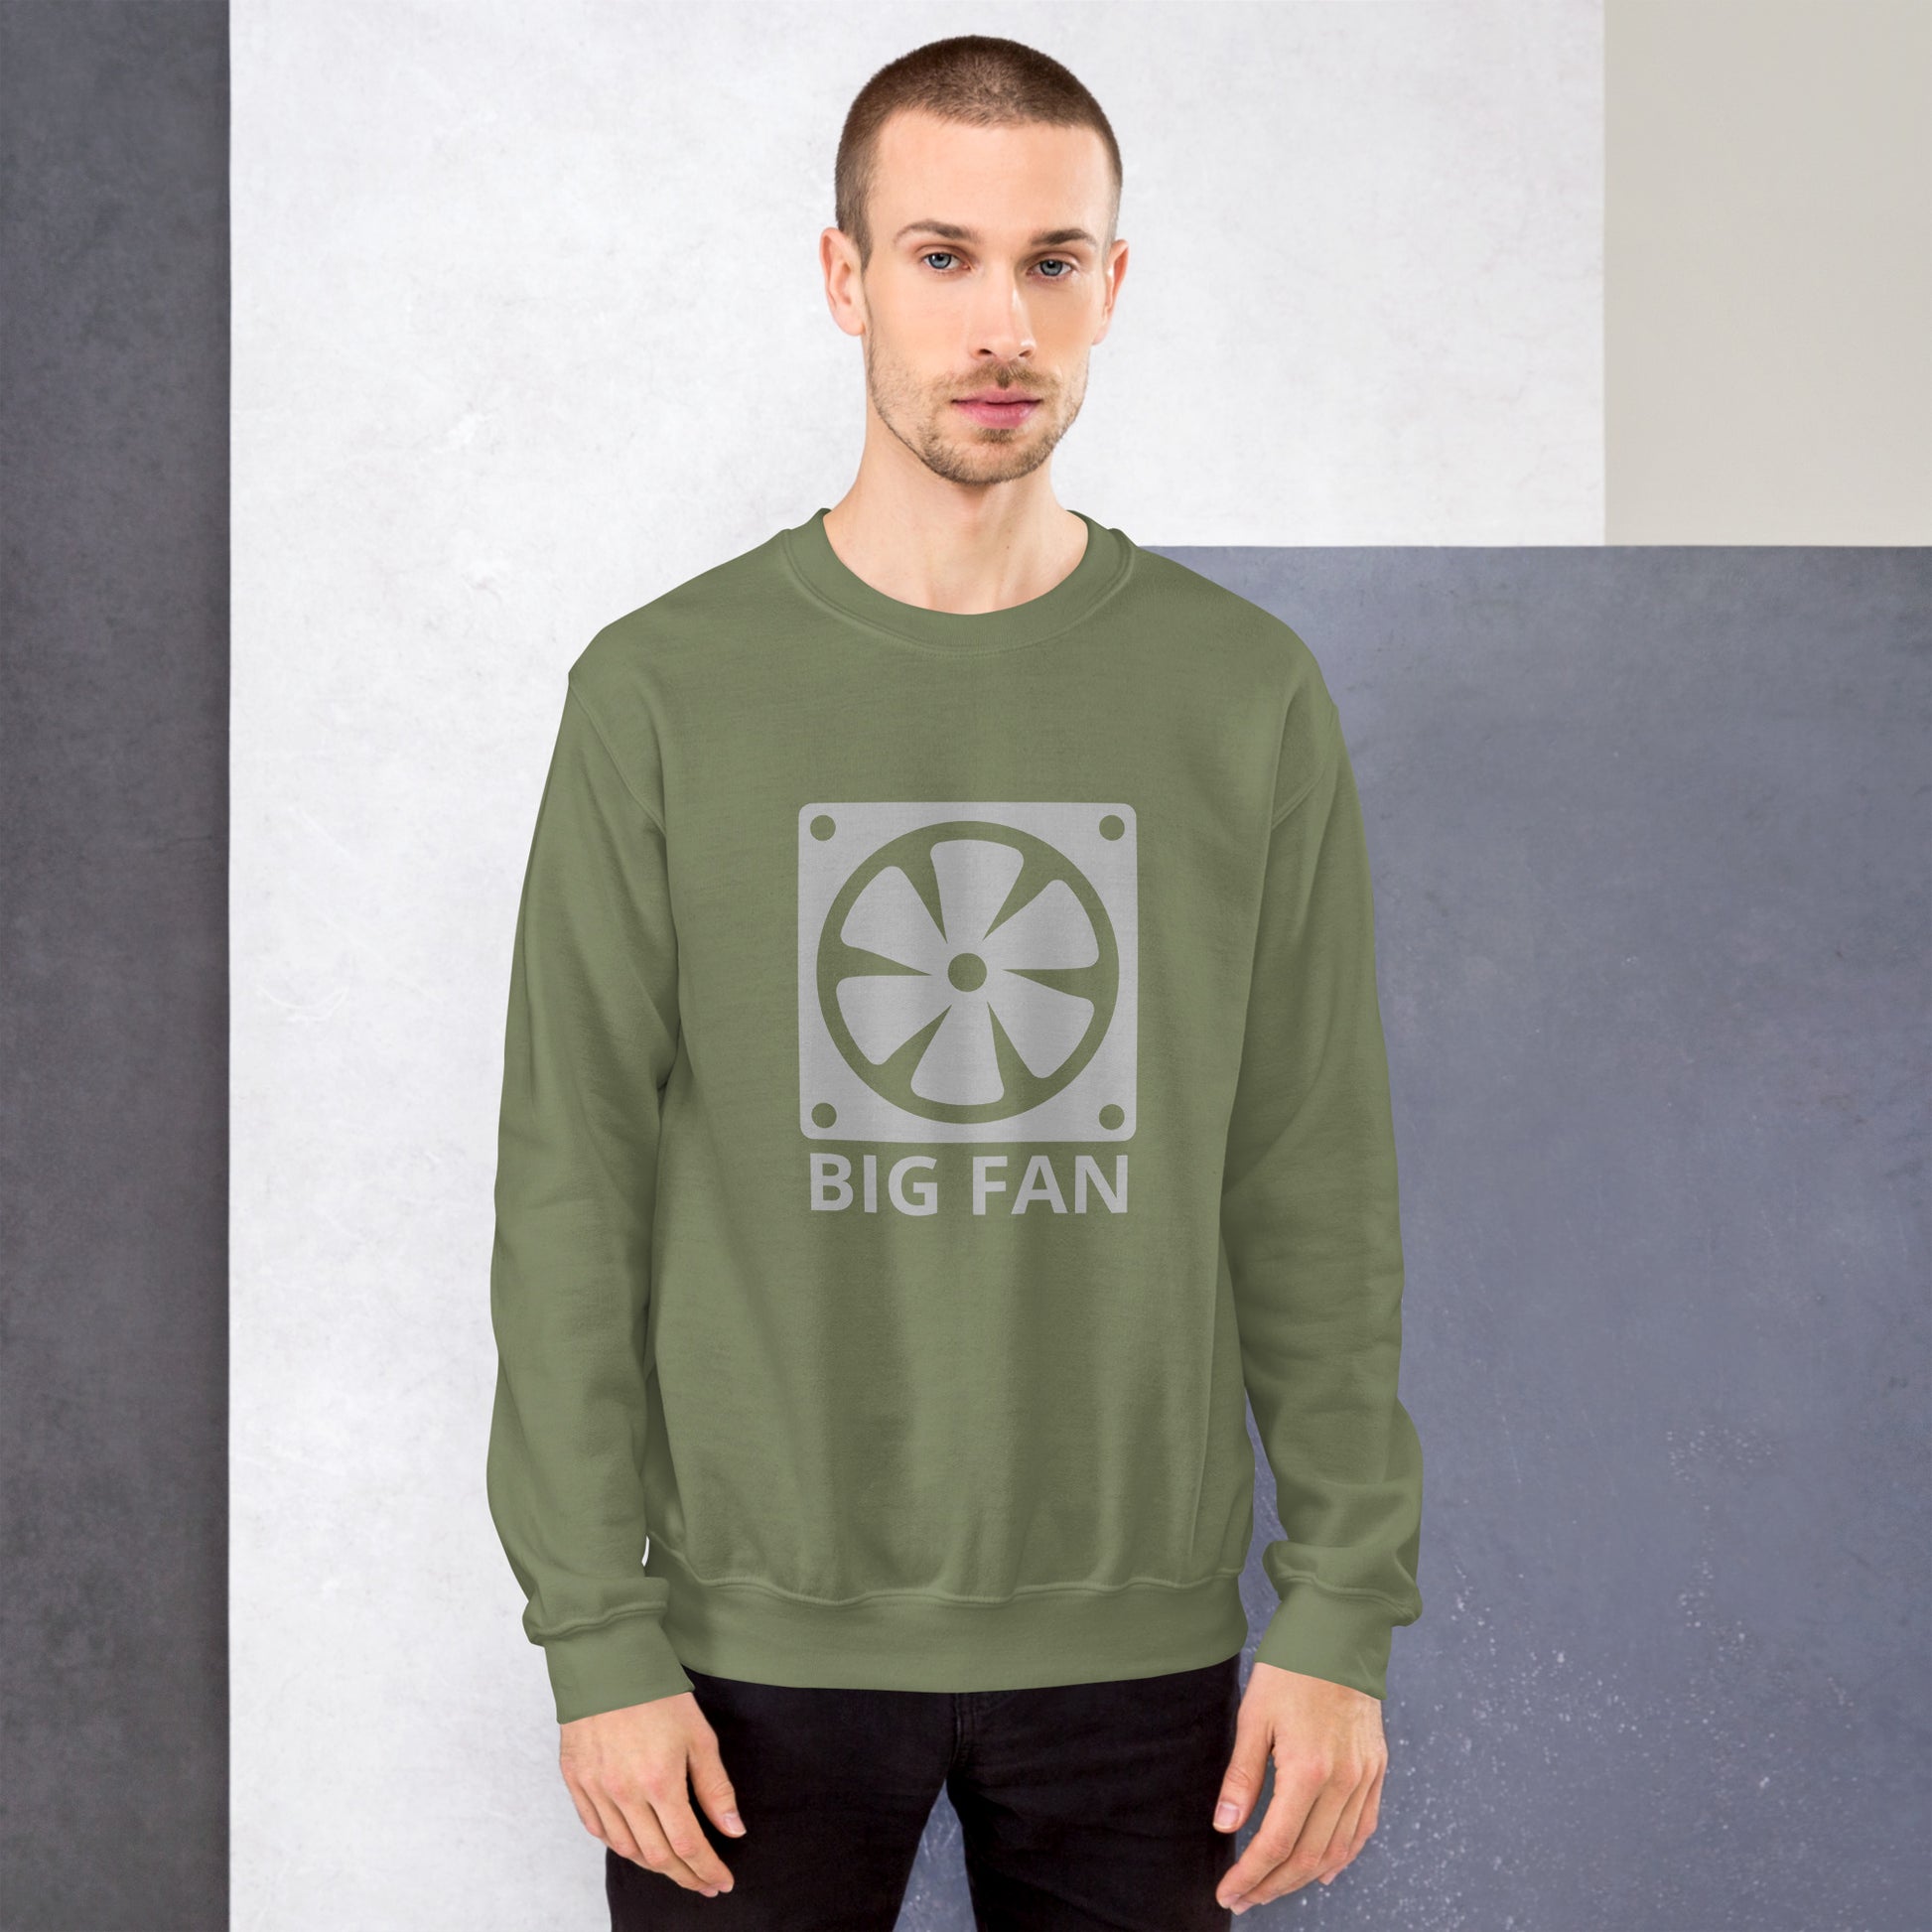 Men with military green sweatshirt with image of a big computer fan and the text "BIG FAN"